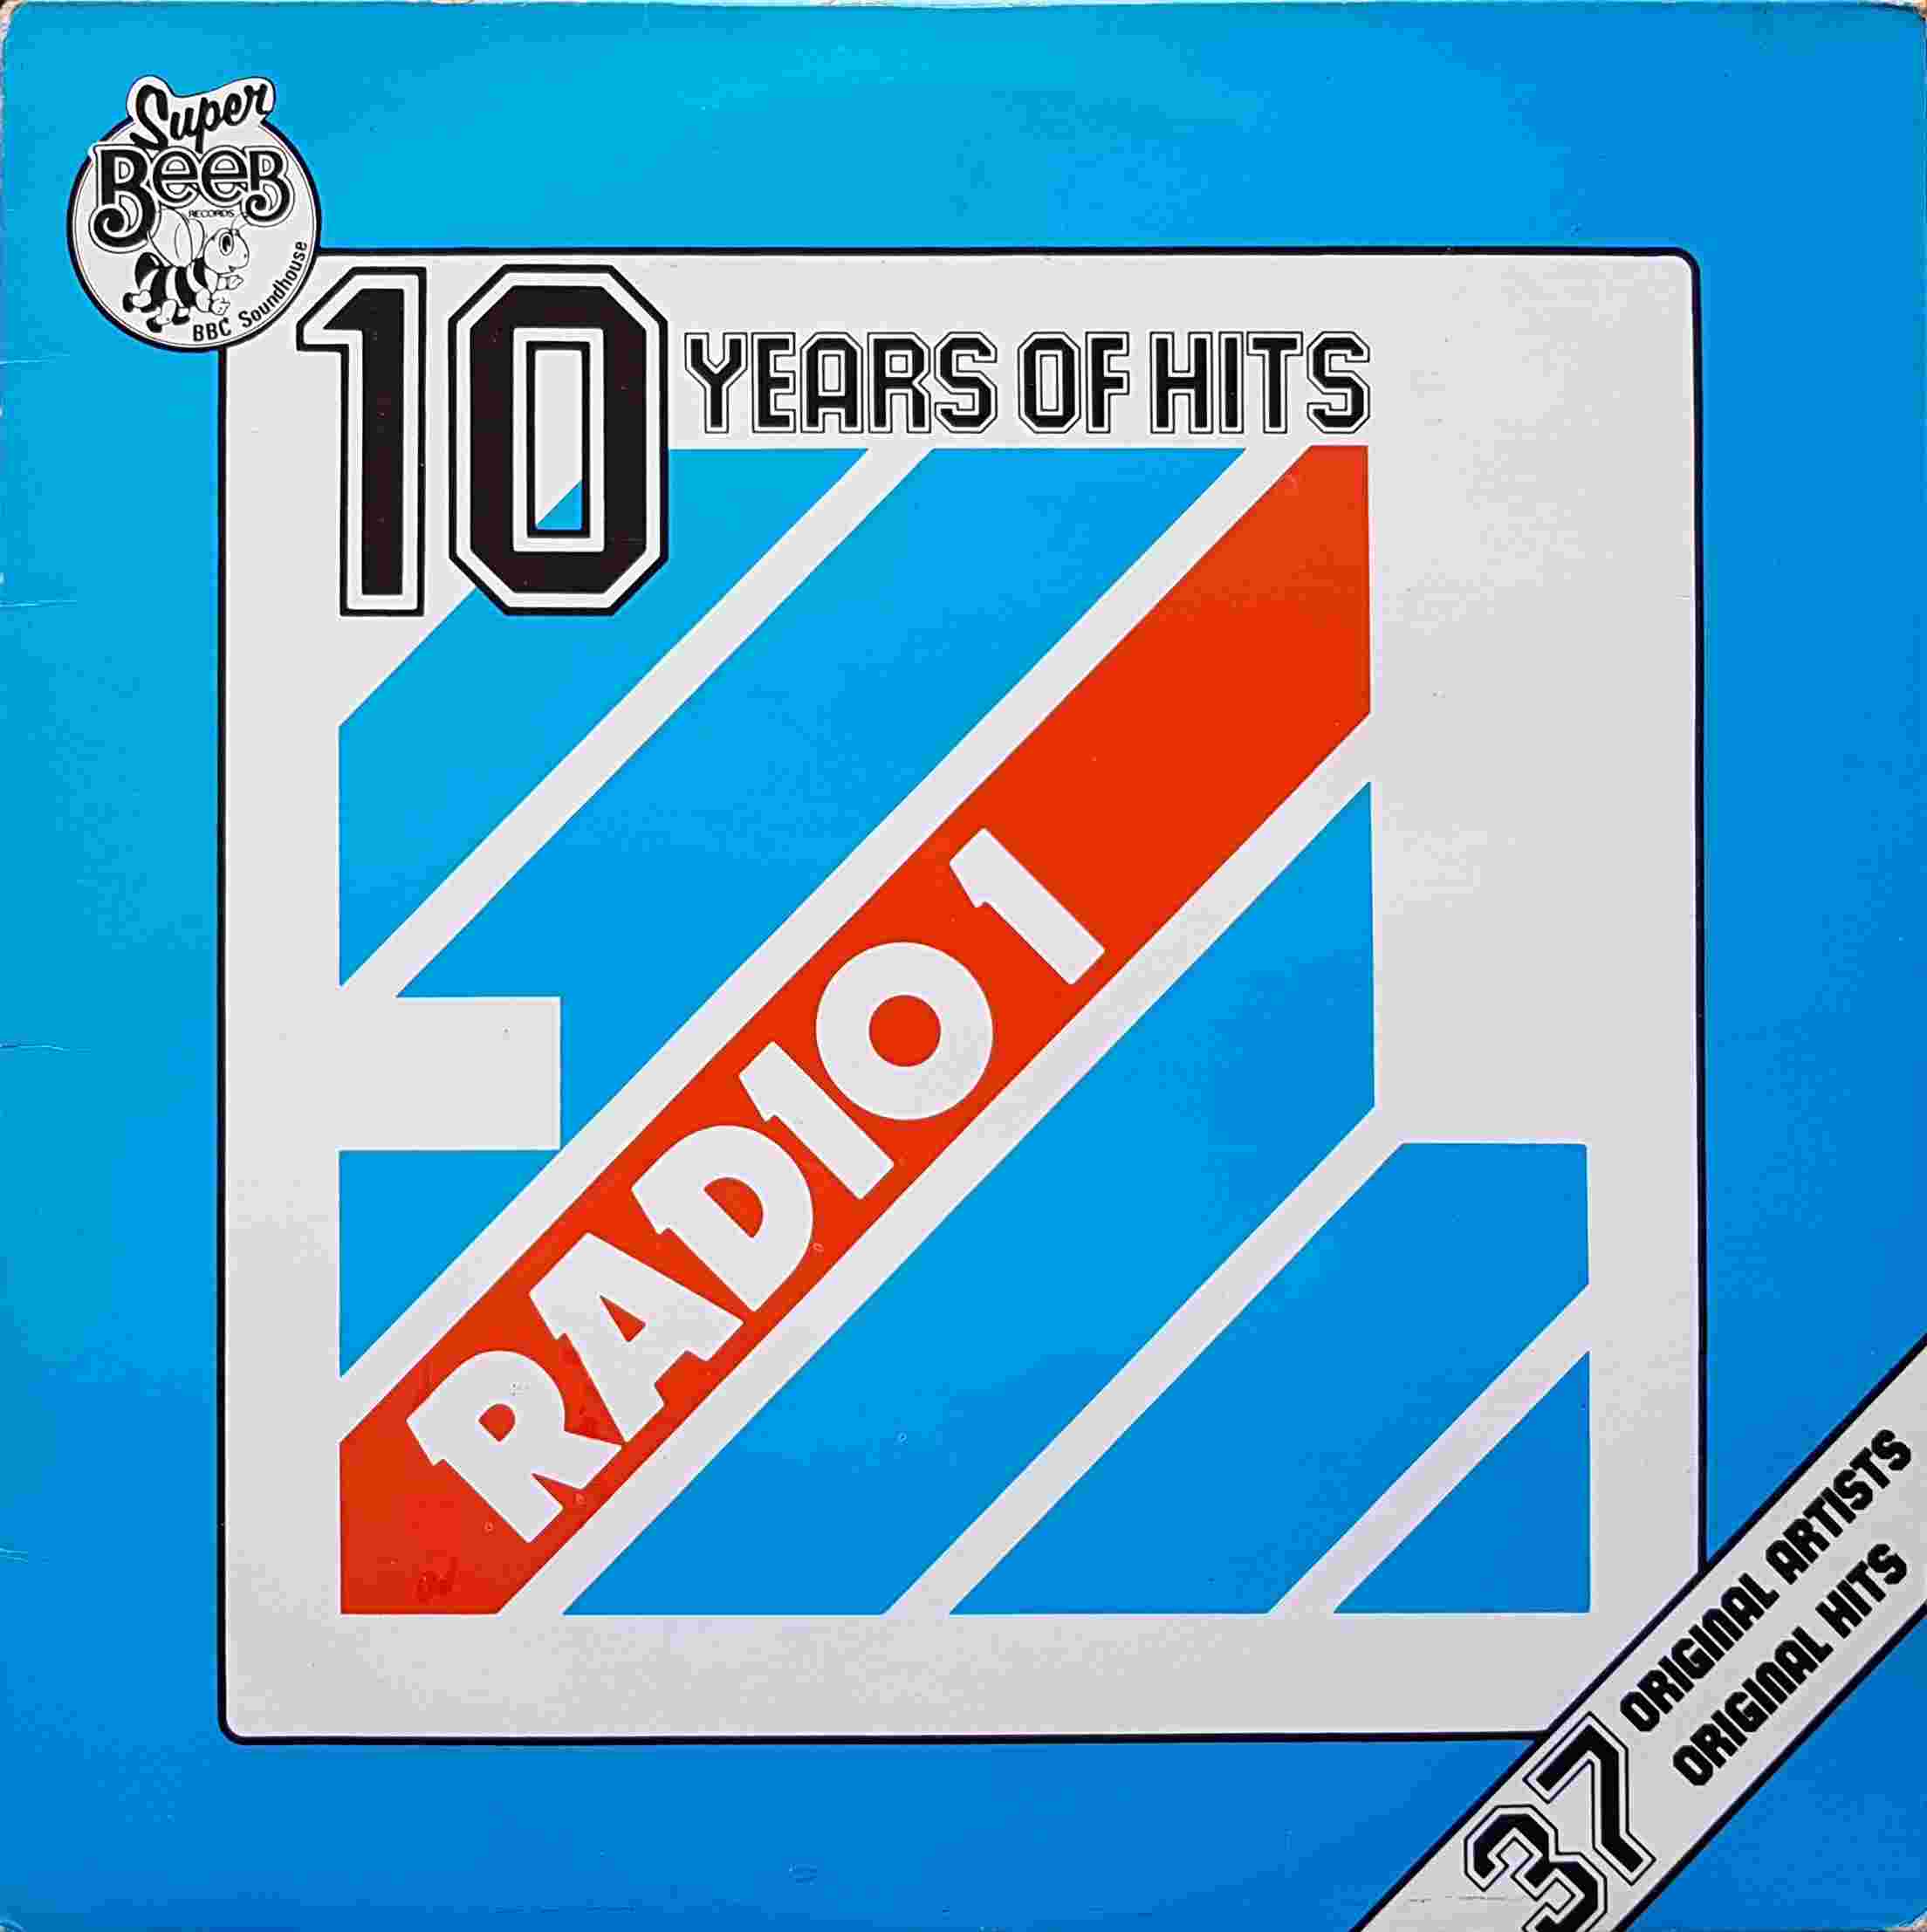 Picture of 10 years of hits - Radio 1 volume 1 by artist Various from the BBC albums - Records and Tapes library